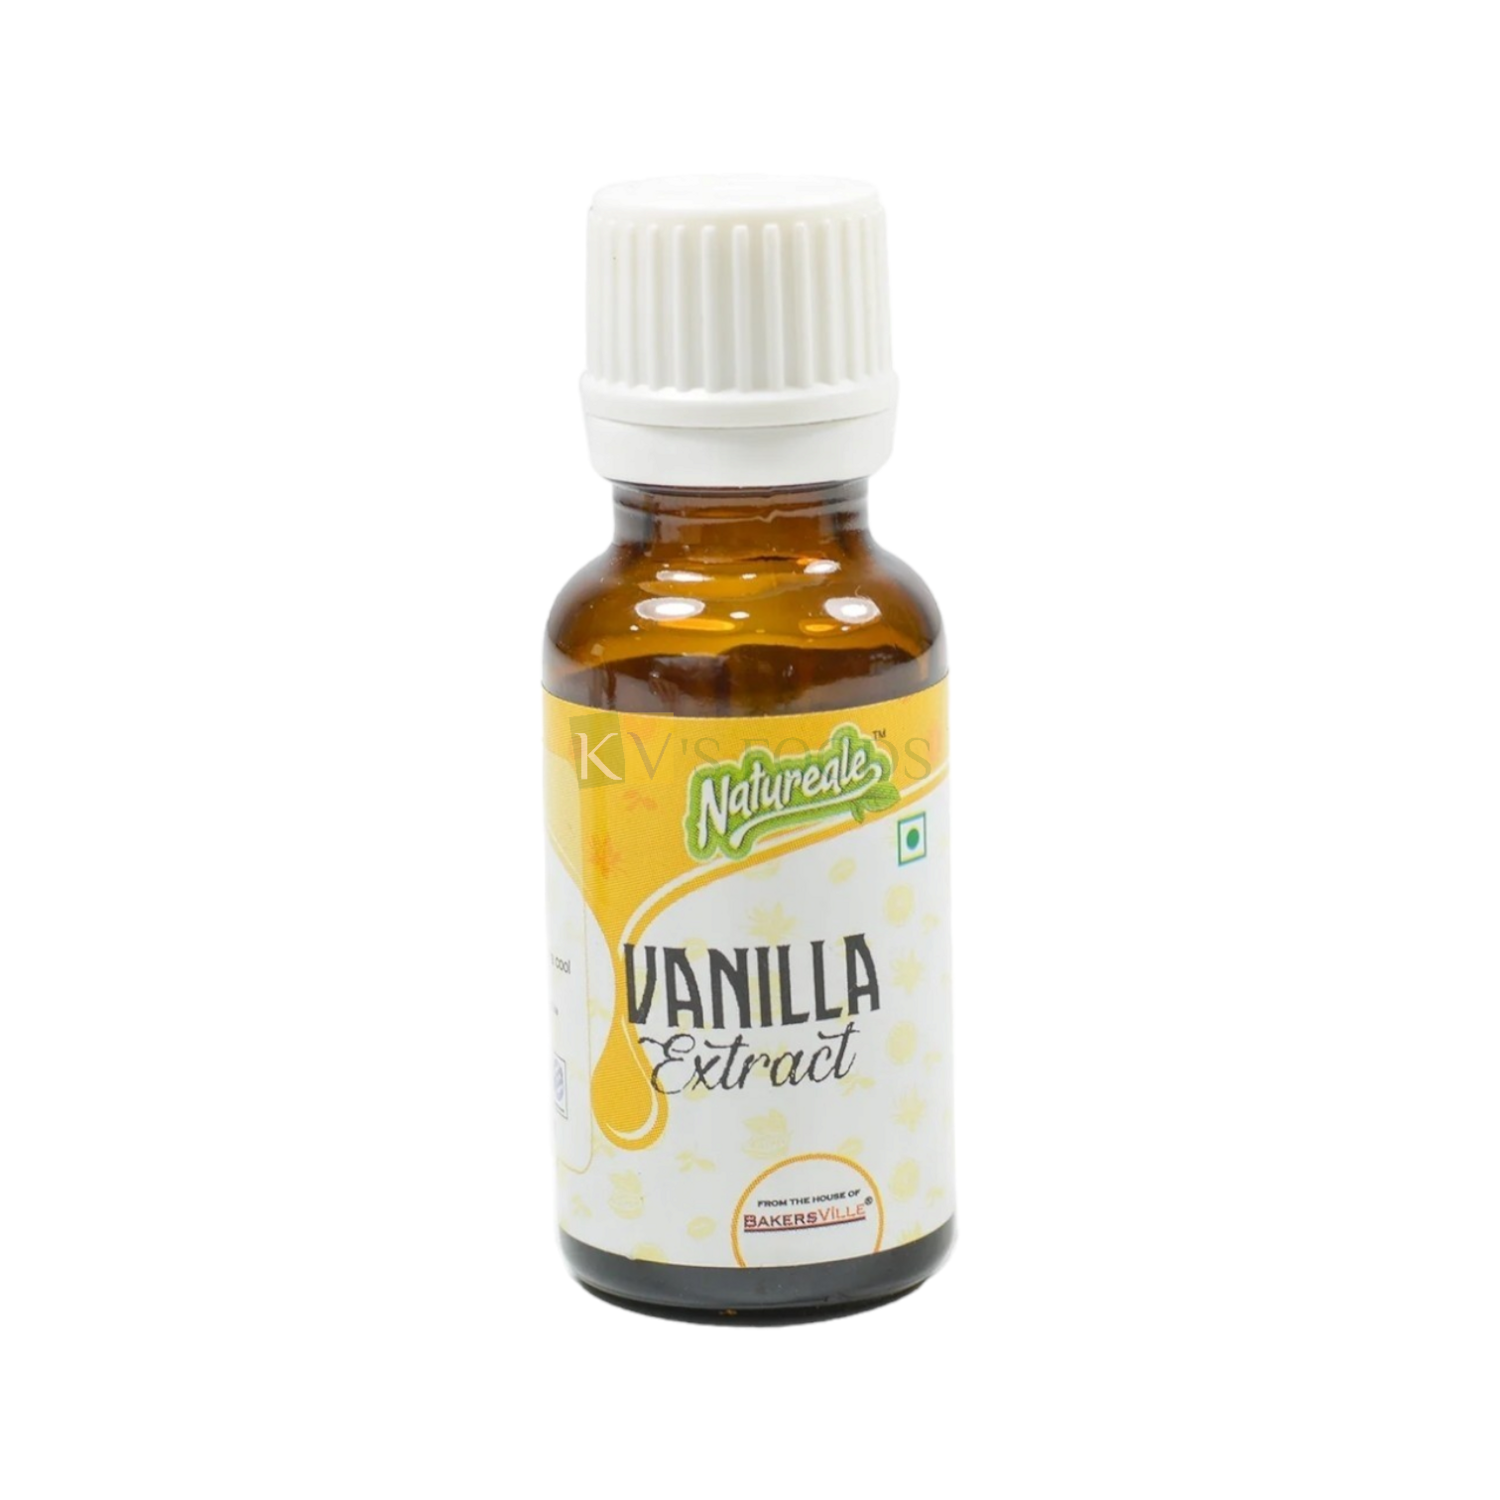 1 PC Natureale Vanilla Extract 20 ML, Suitable for making Vanilla Flavoured Cakes, Bakery Cakes, Perfect for Baking, Flavoring Drinks, Chocolates, Dessert, Ice-cream, Baked goods, Custard, Caramel